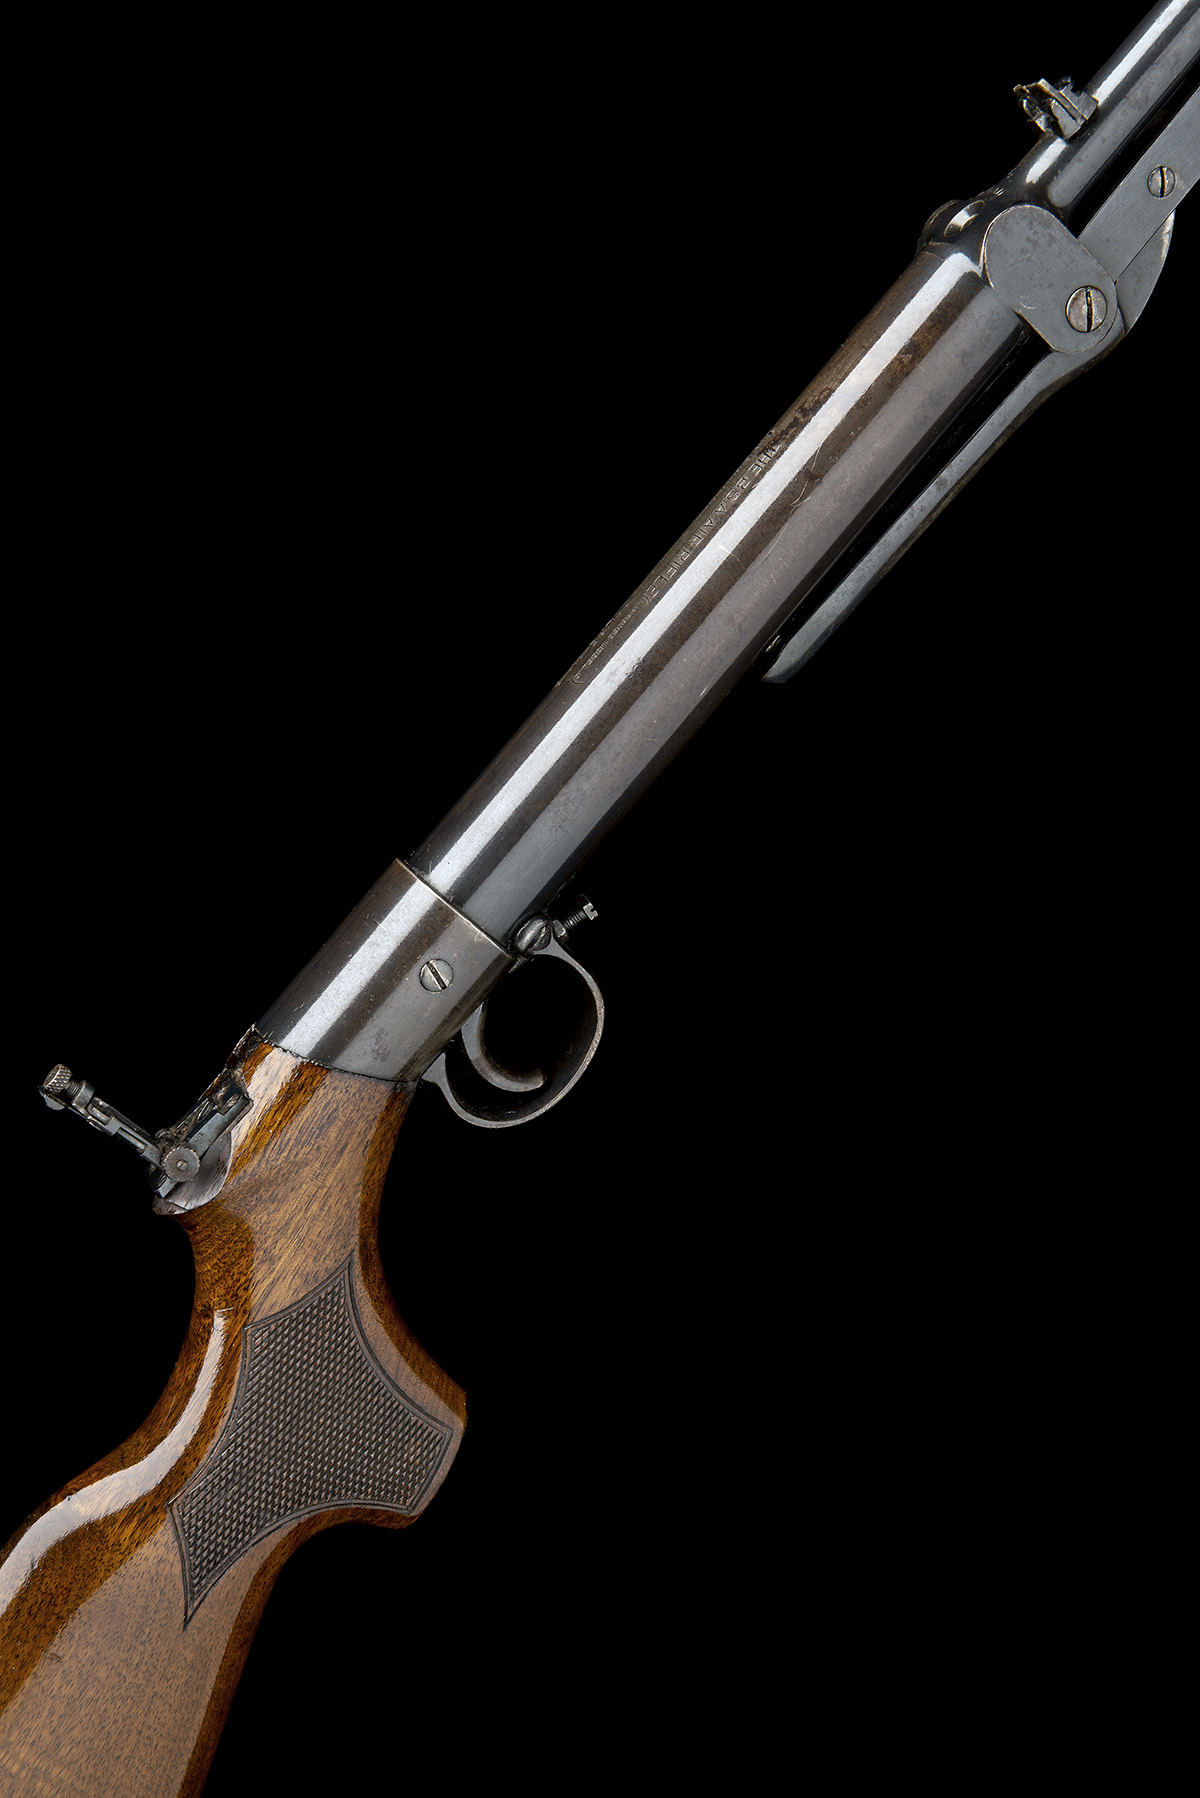 BSA, BIRMINGHAM A SCARCE .177 UNDER-LEVER AIR-RIFLE, MODEL 'IMPROVED MODEL 'D' WITH FACTORY